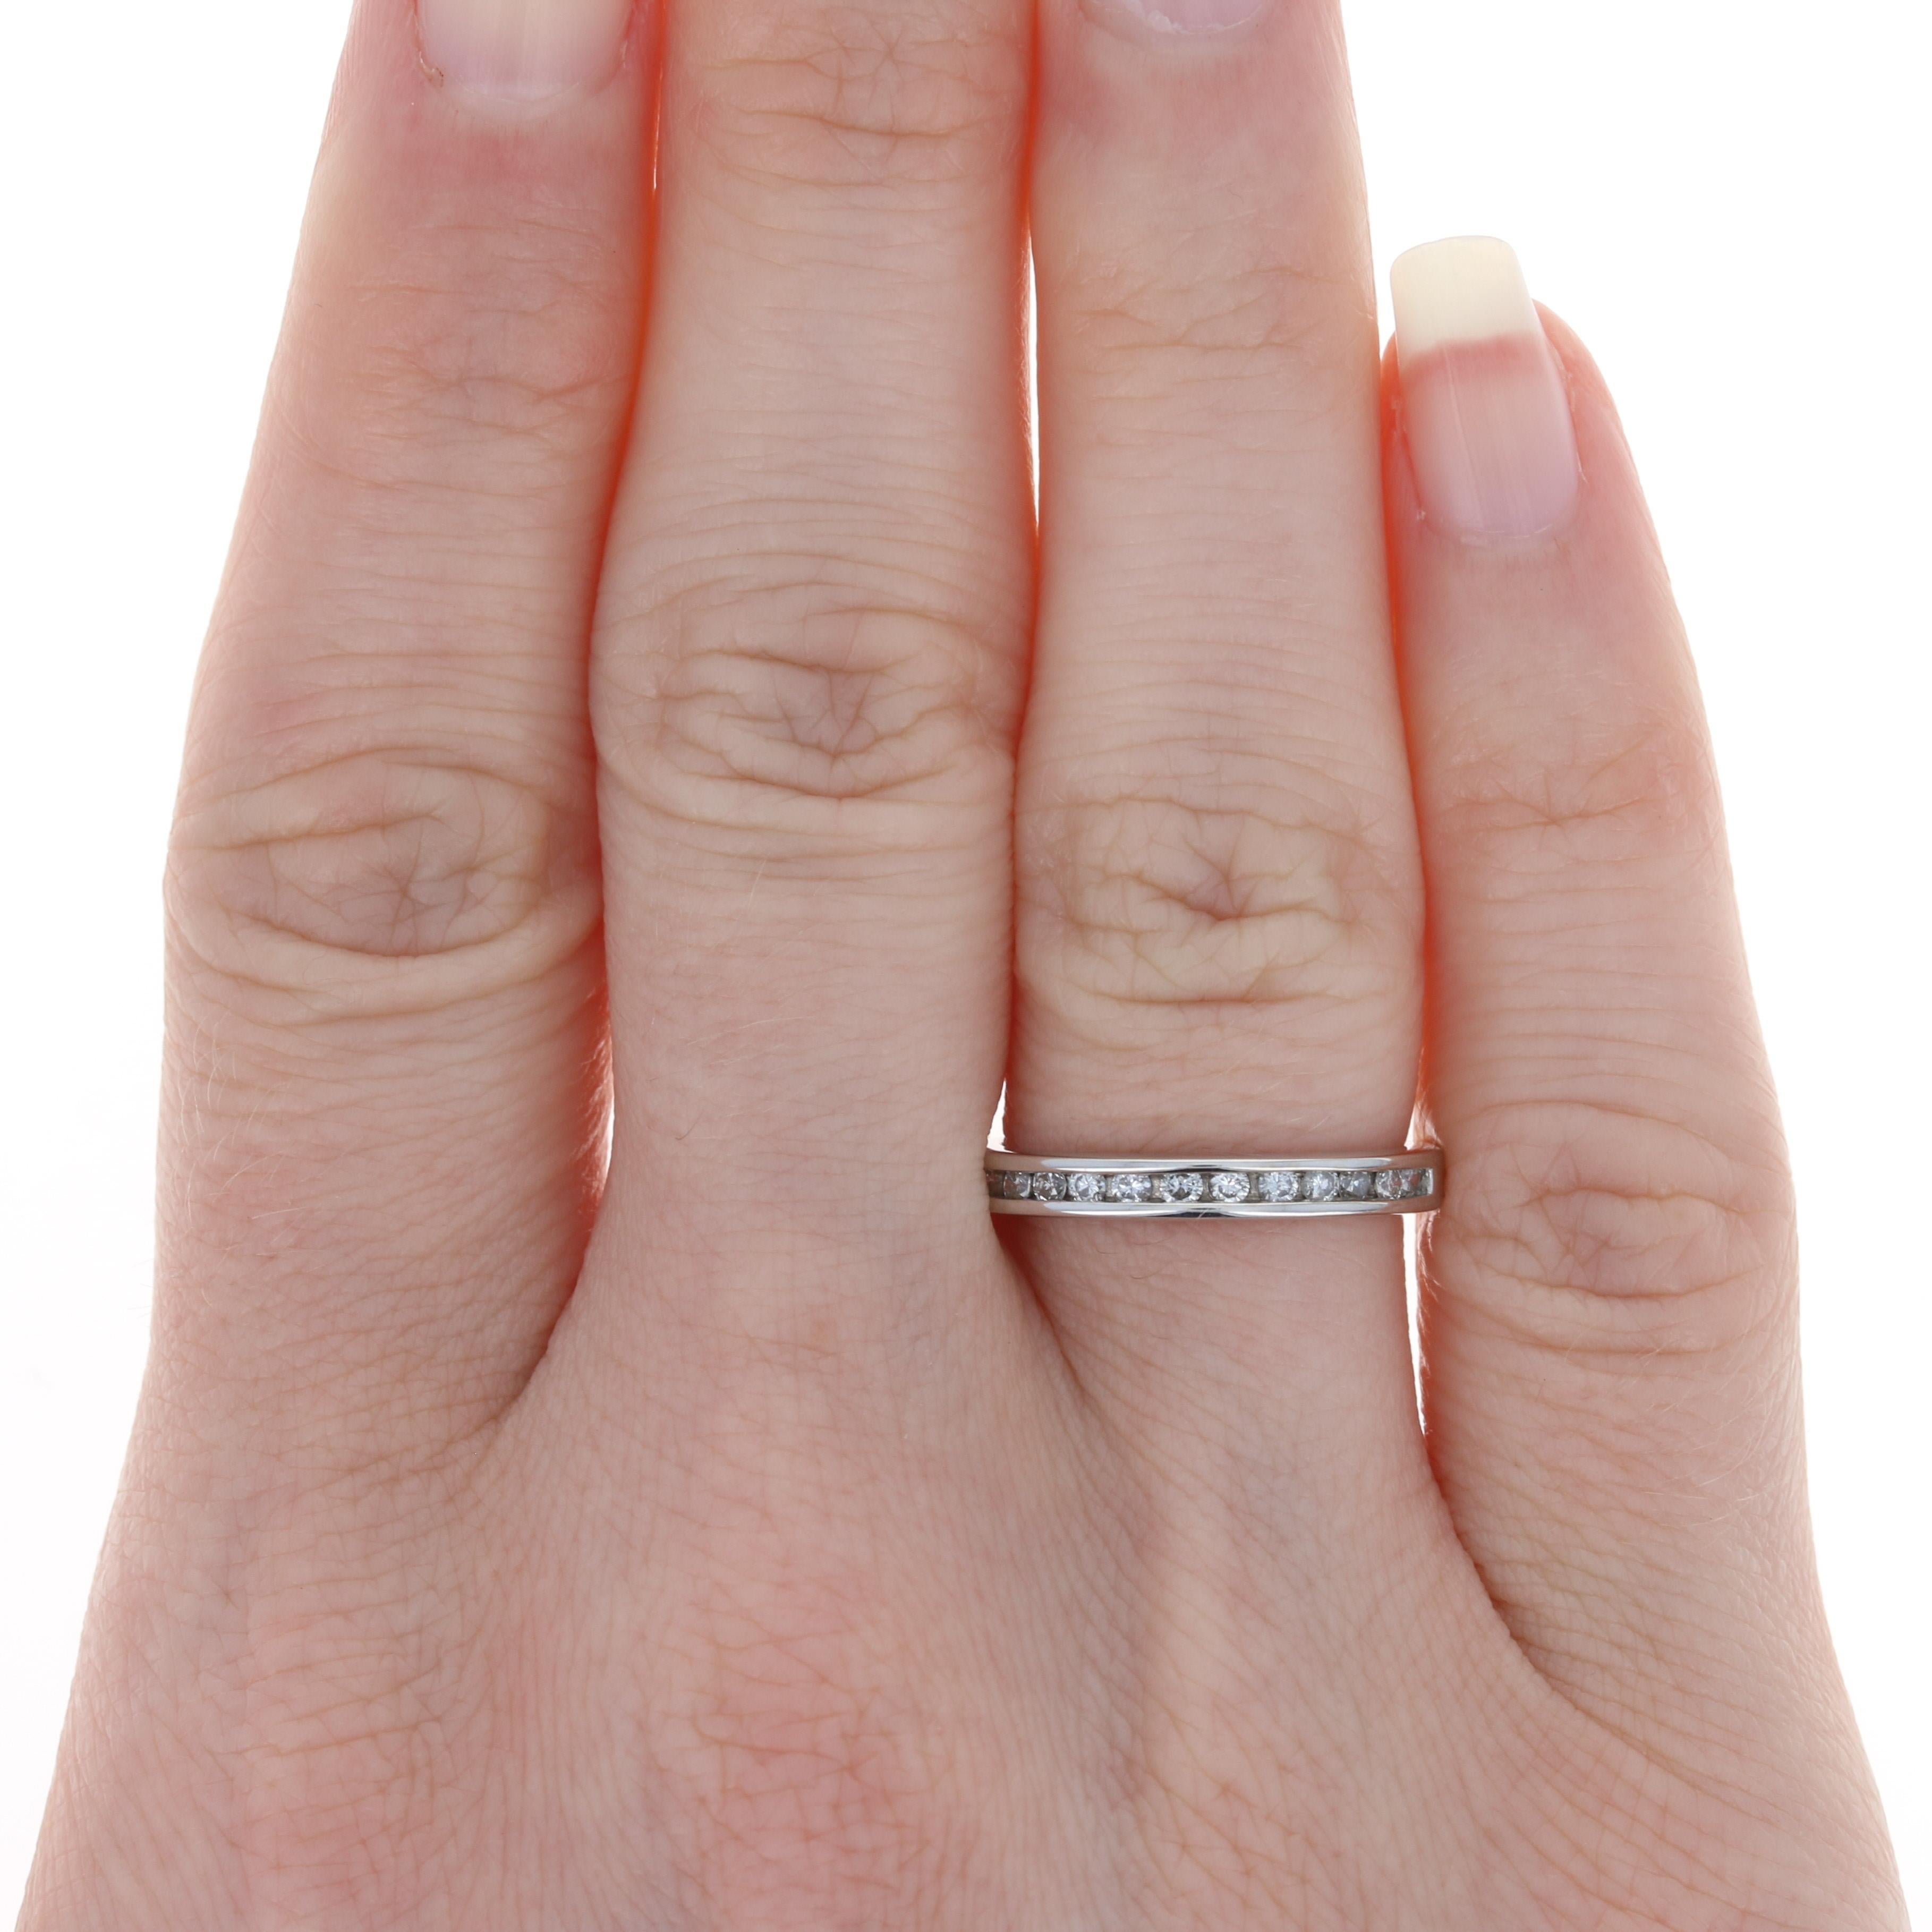 This ring is a size 5 3/4 - 6, but it can be re-sized up 1 size for a $30 fee. Once a ring is re-sized, we guarantee the work but we are unable to offer a refund on the sizing. Please contact for additional sizing options.

Metal Content: Guaranteed